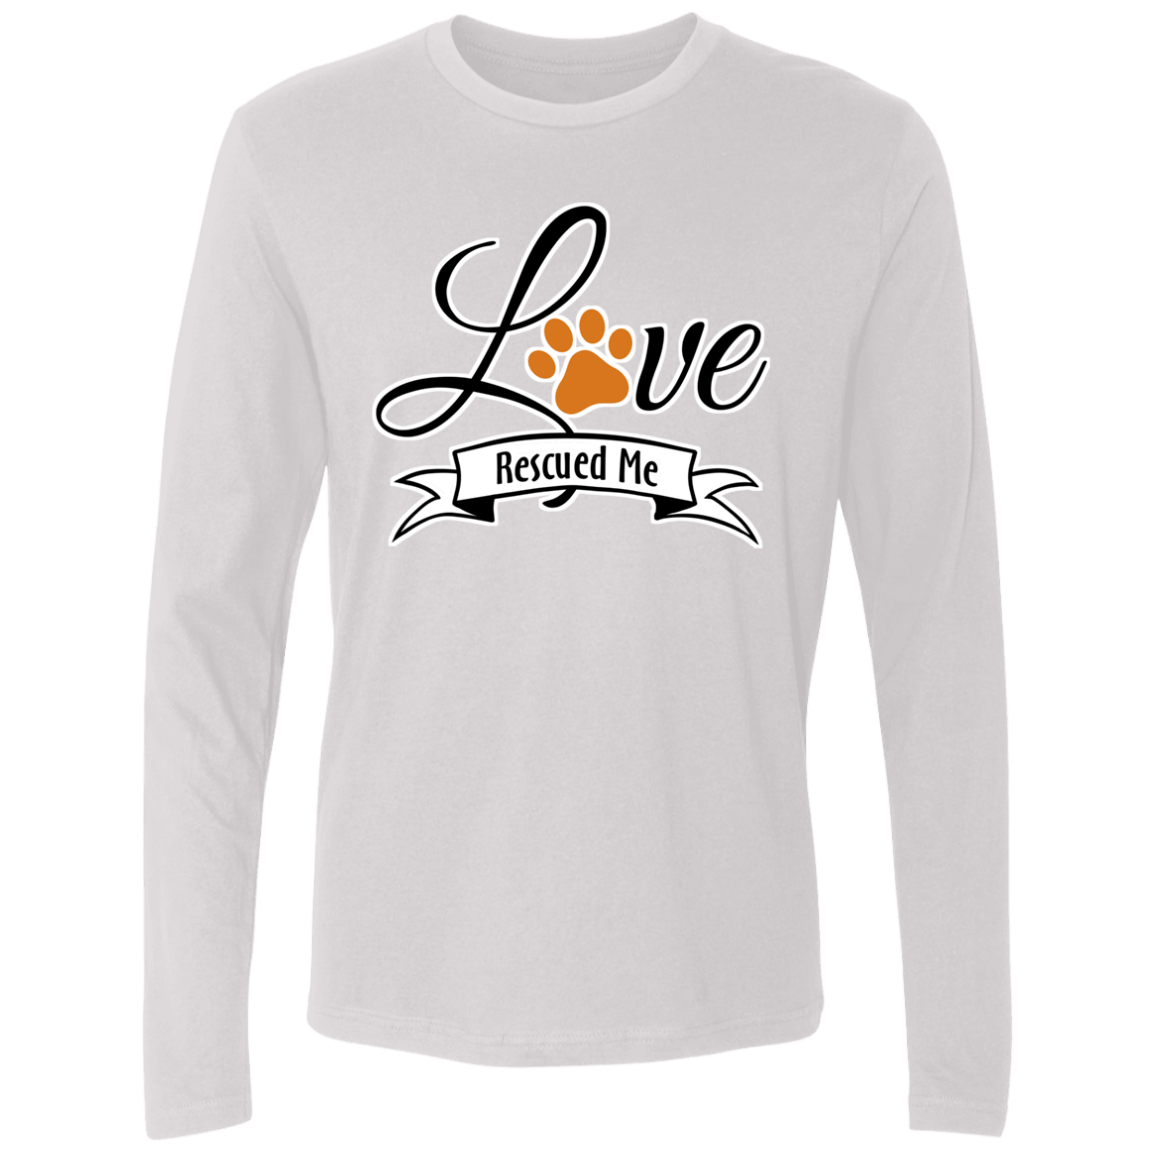 Love Rescued Me - Long Sleeve T-shirt.